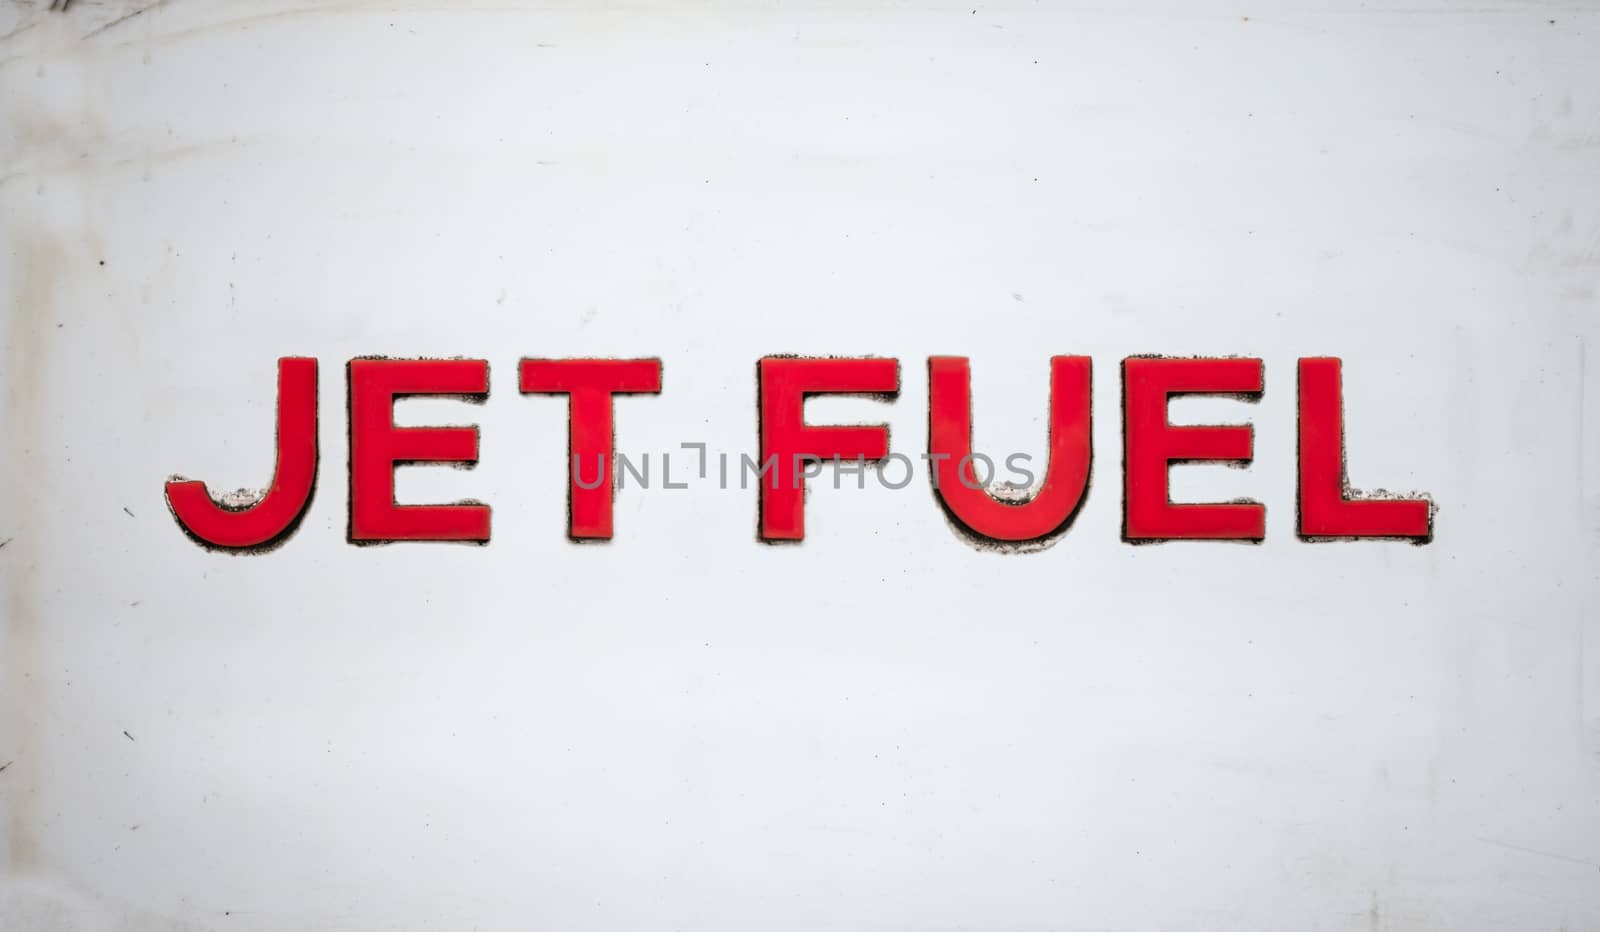 Travel Image Of A Sign For Jet Fuel On An Aircraft At An Airport